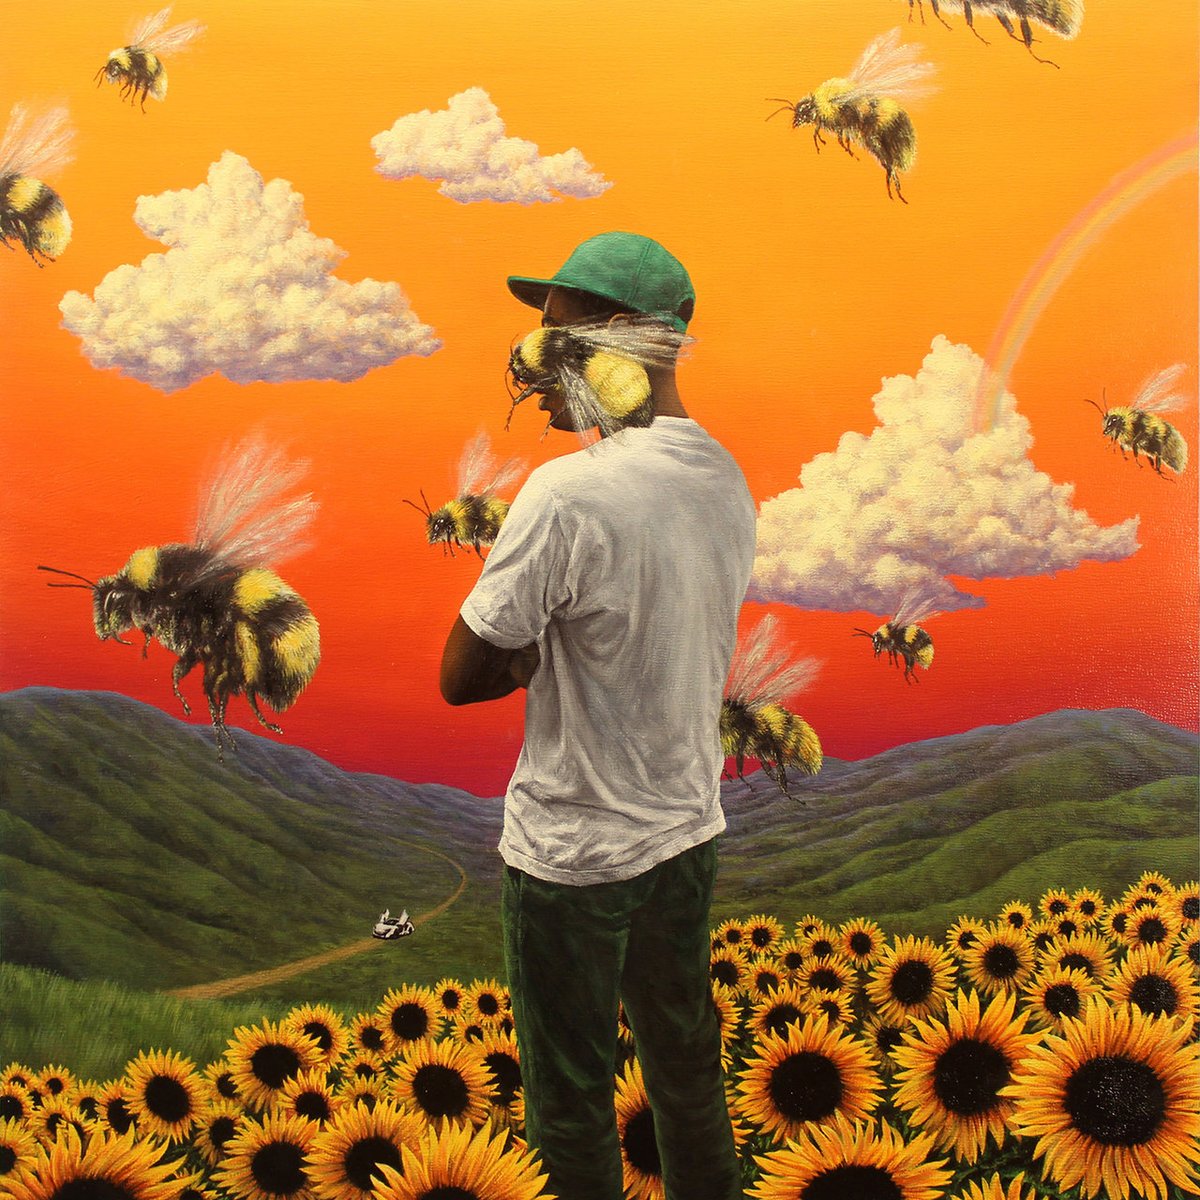 Tyler, The Creator and Kali Uchis’s “See You Again” is now elegible for x8 Platinum in the US for selling over 8,000,000 units.